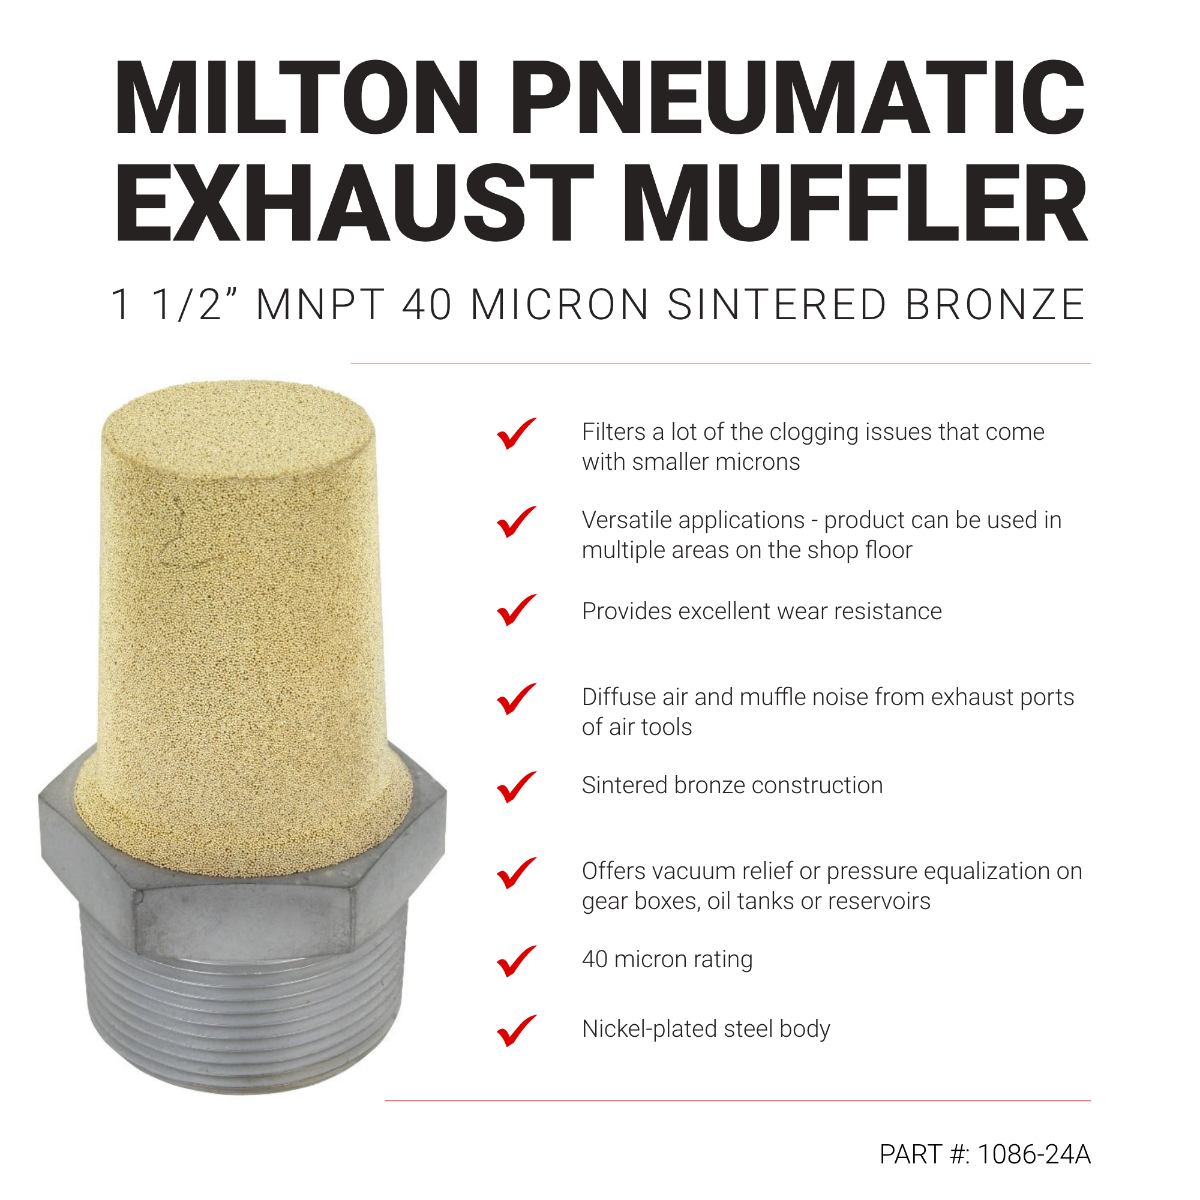 Milton Pneumatic Exhaust Muffler, 1” MNPT 40 Micron Sintered Bronze Silencer/Diffuse Air and Noise Reducer - Box of 25